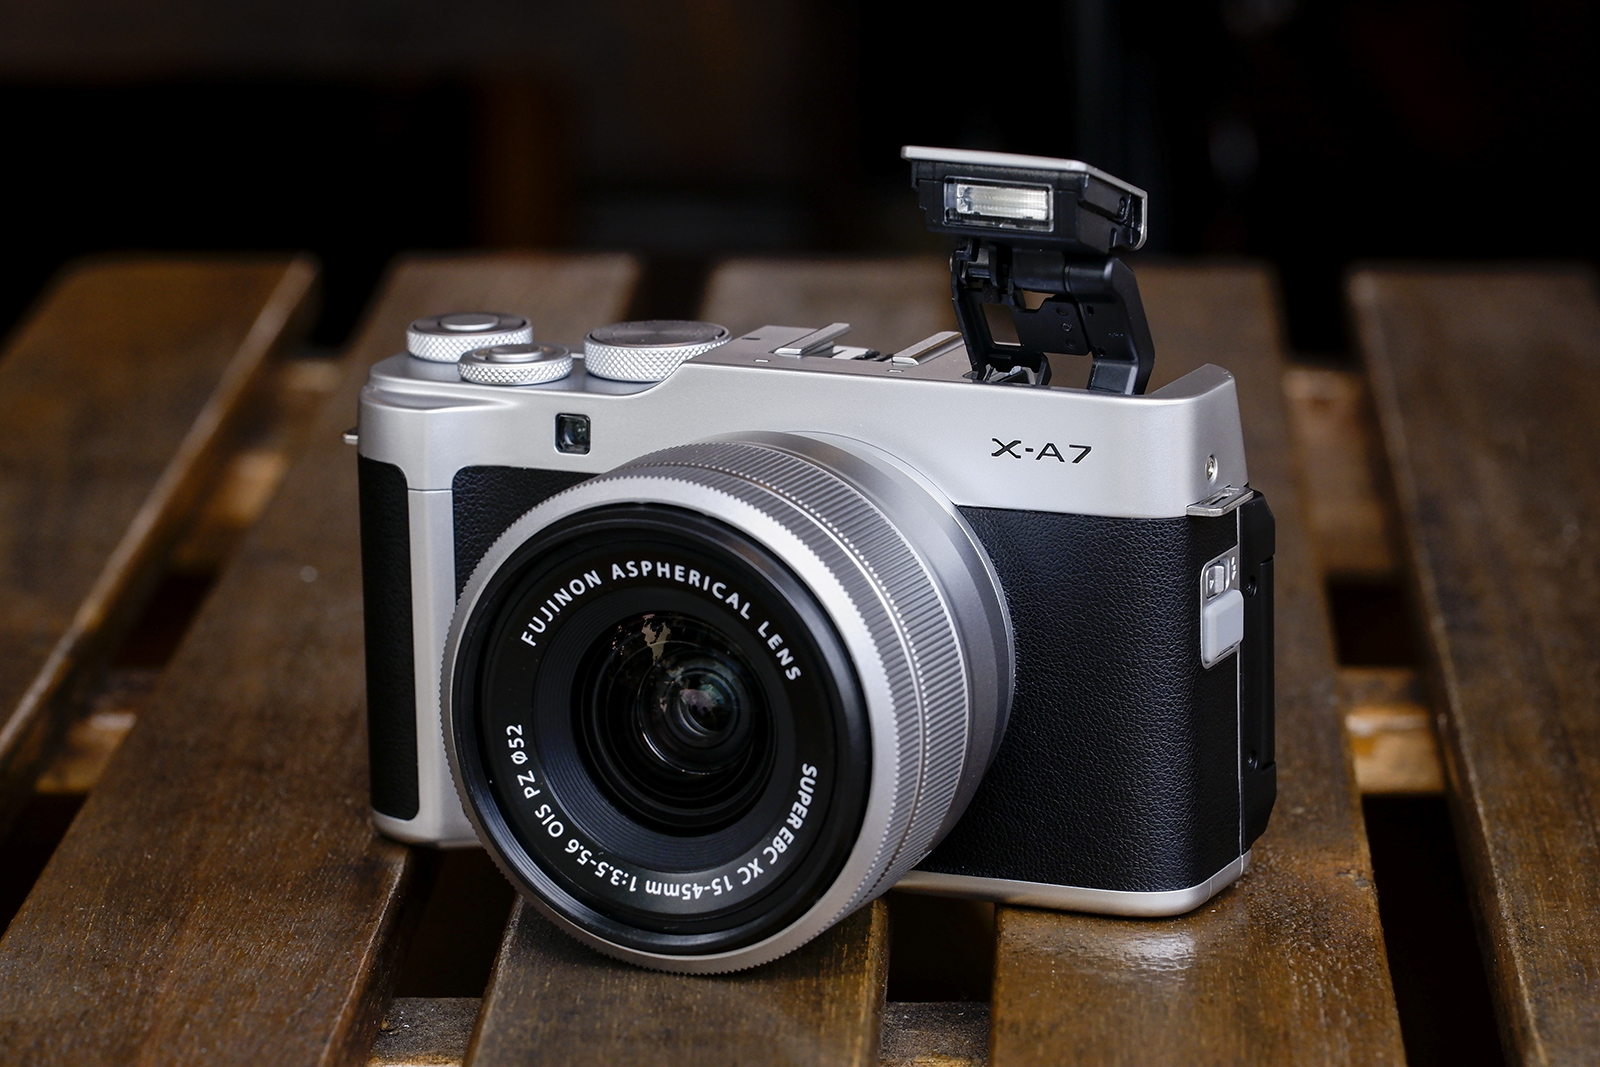 Bekend Vooruitgang Verslaving The Fujifilm X-A7 is A Lightweight in Both Size and Price | Digital Trends